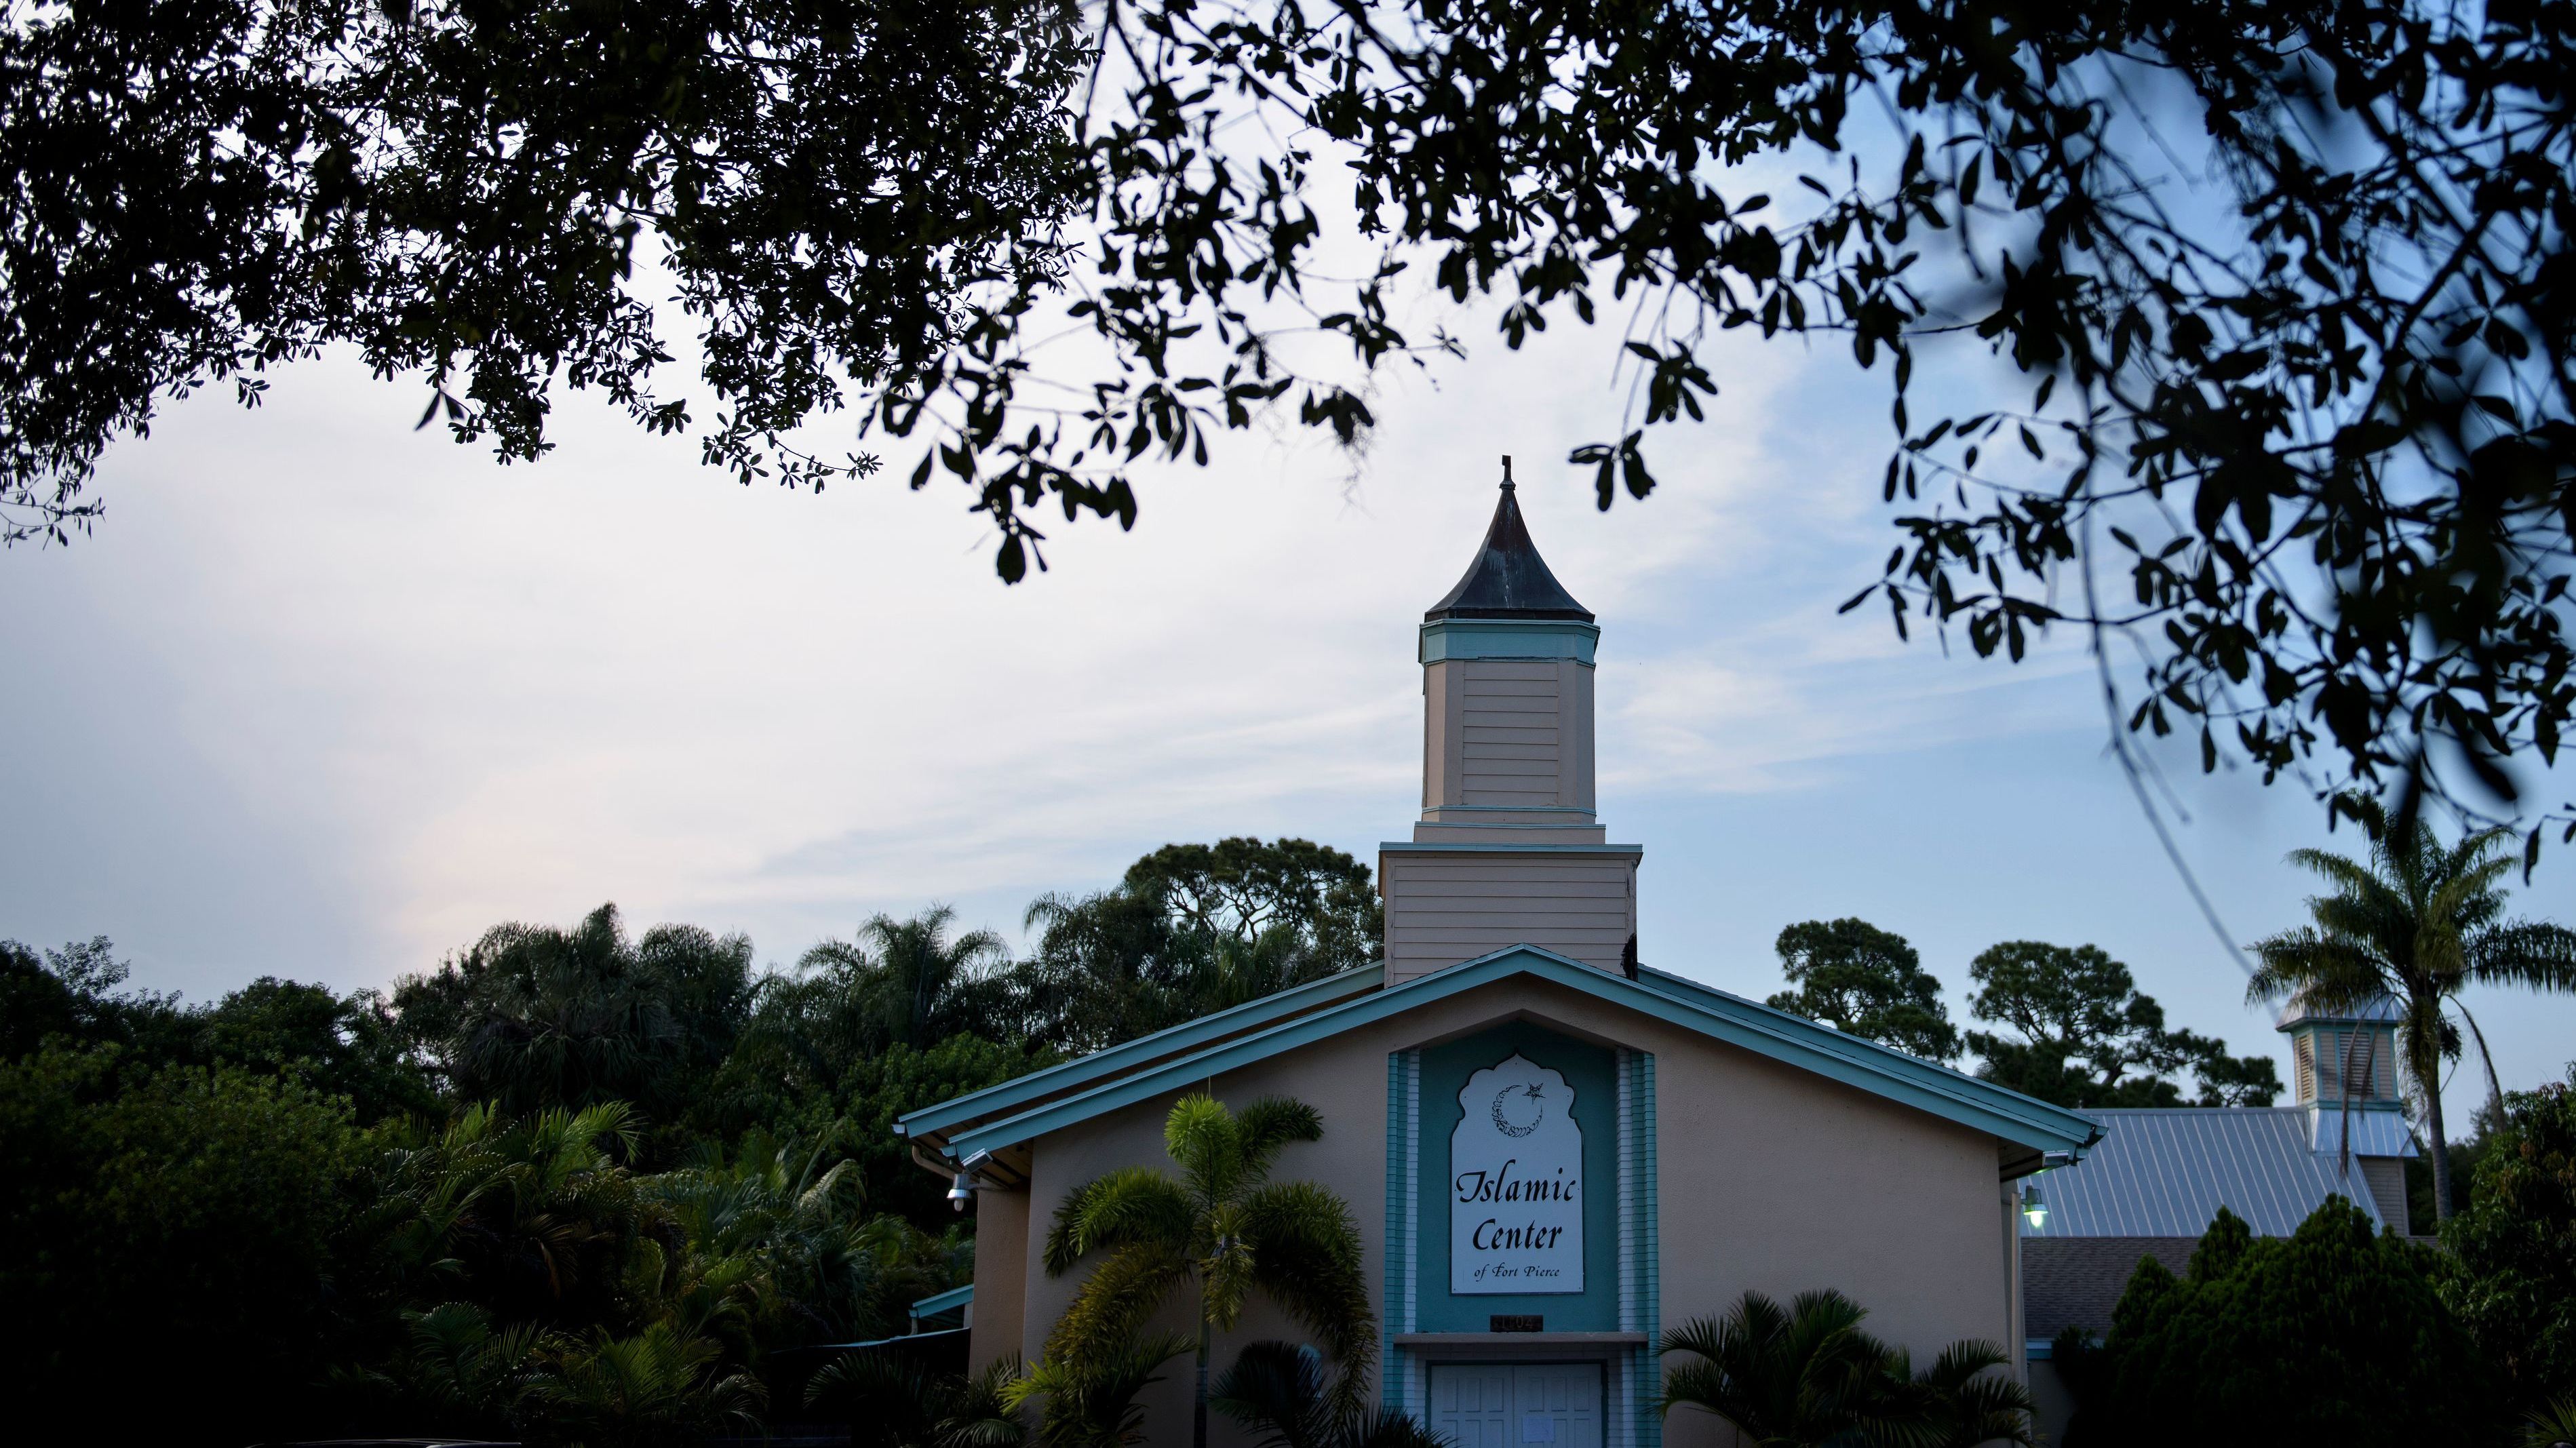 The mosque in Fort Pierce, Fla., where Pulse nightclub shooter Omar Mateen had worshipped, is shown on June 14. A fire broke out at the Islamic Center of Fort Pierce early Monday. (Photo by Brendan Smialowski/AFP/Getty Images)